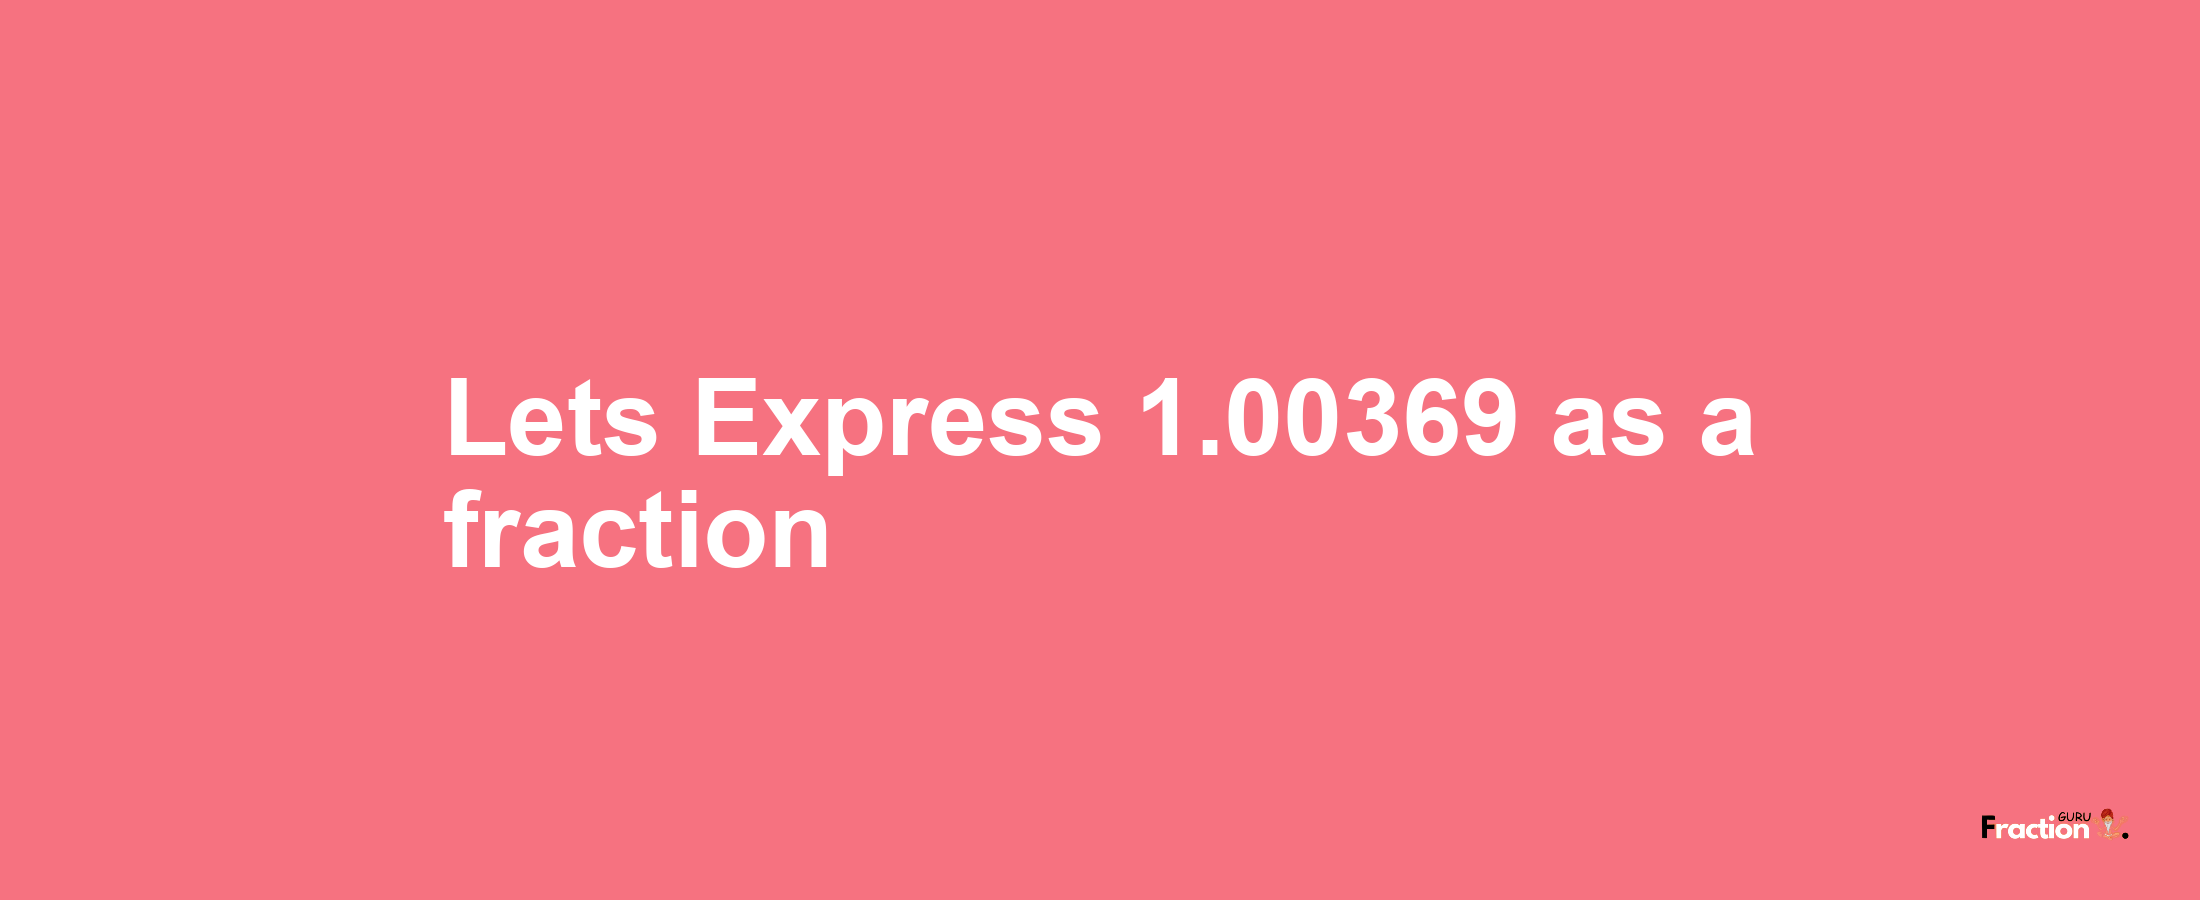 Lets Express 1.00369 as afraction